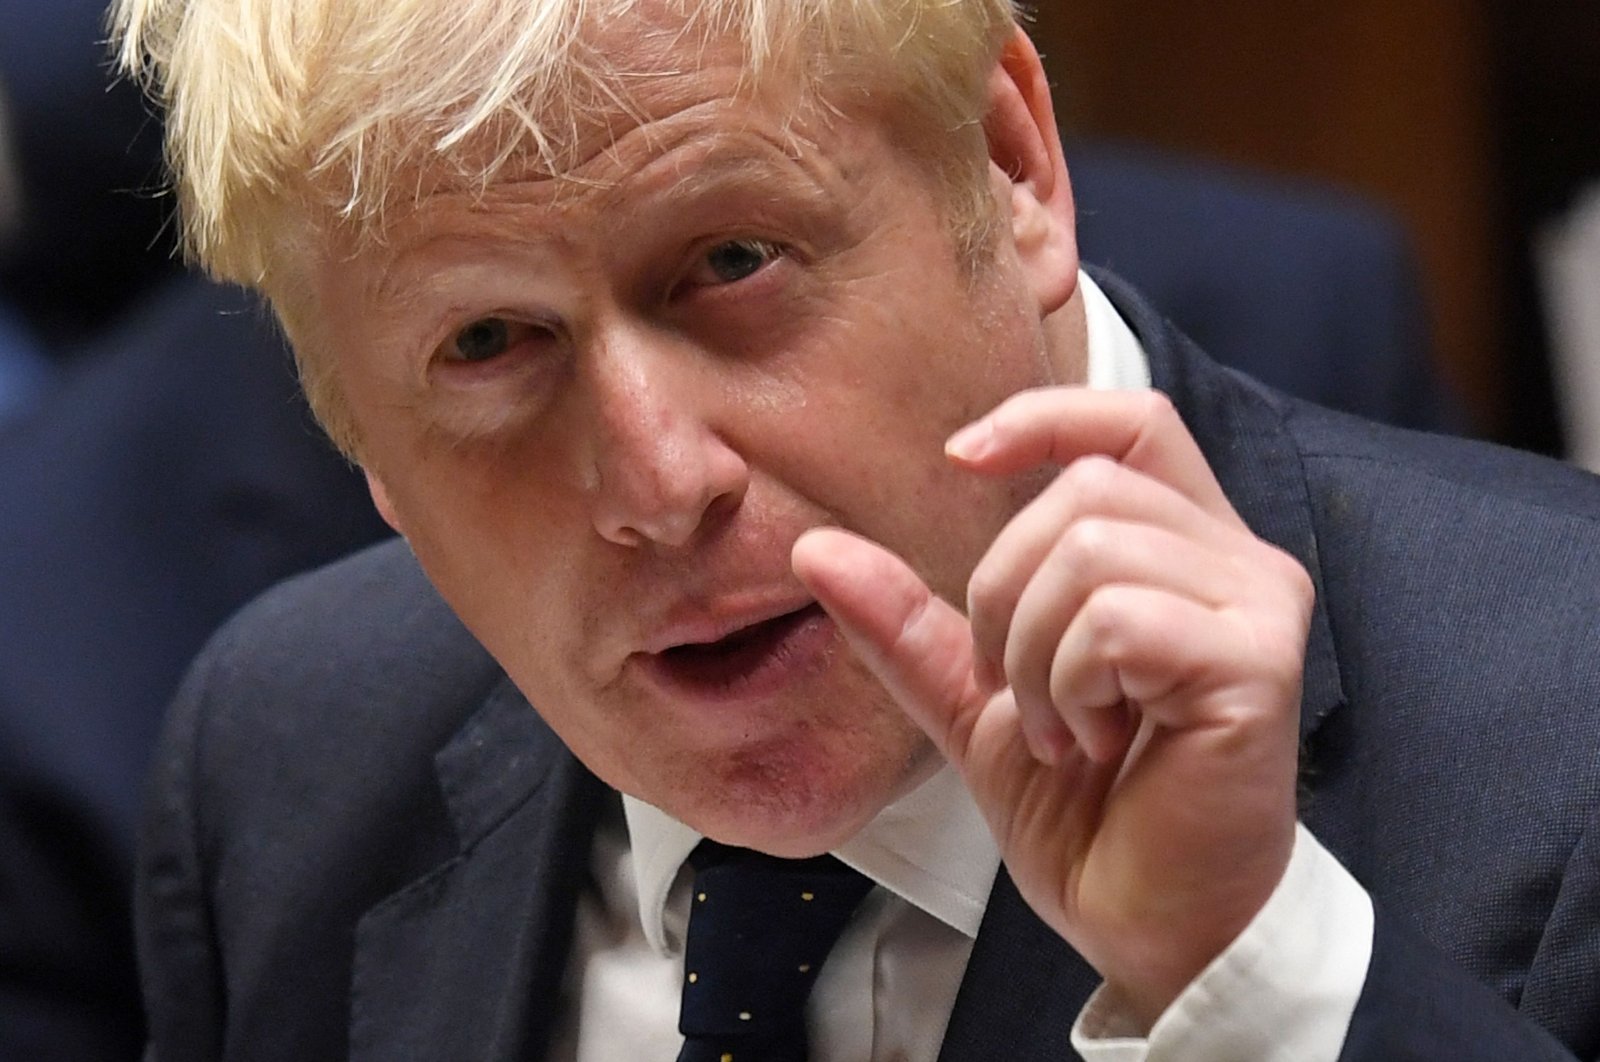 A handout photograph released by the U.K. Parliament shows Britain's Prime Minister Boris Johnson making a statement on health and social care in the House of Commons in London, U.K., Sept. 7, 2021.(Photo by Jessica Taylor/U.K. Parliament via AFP)